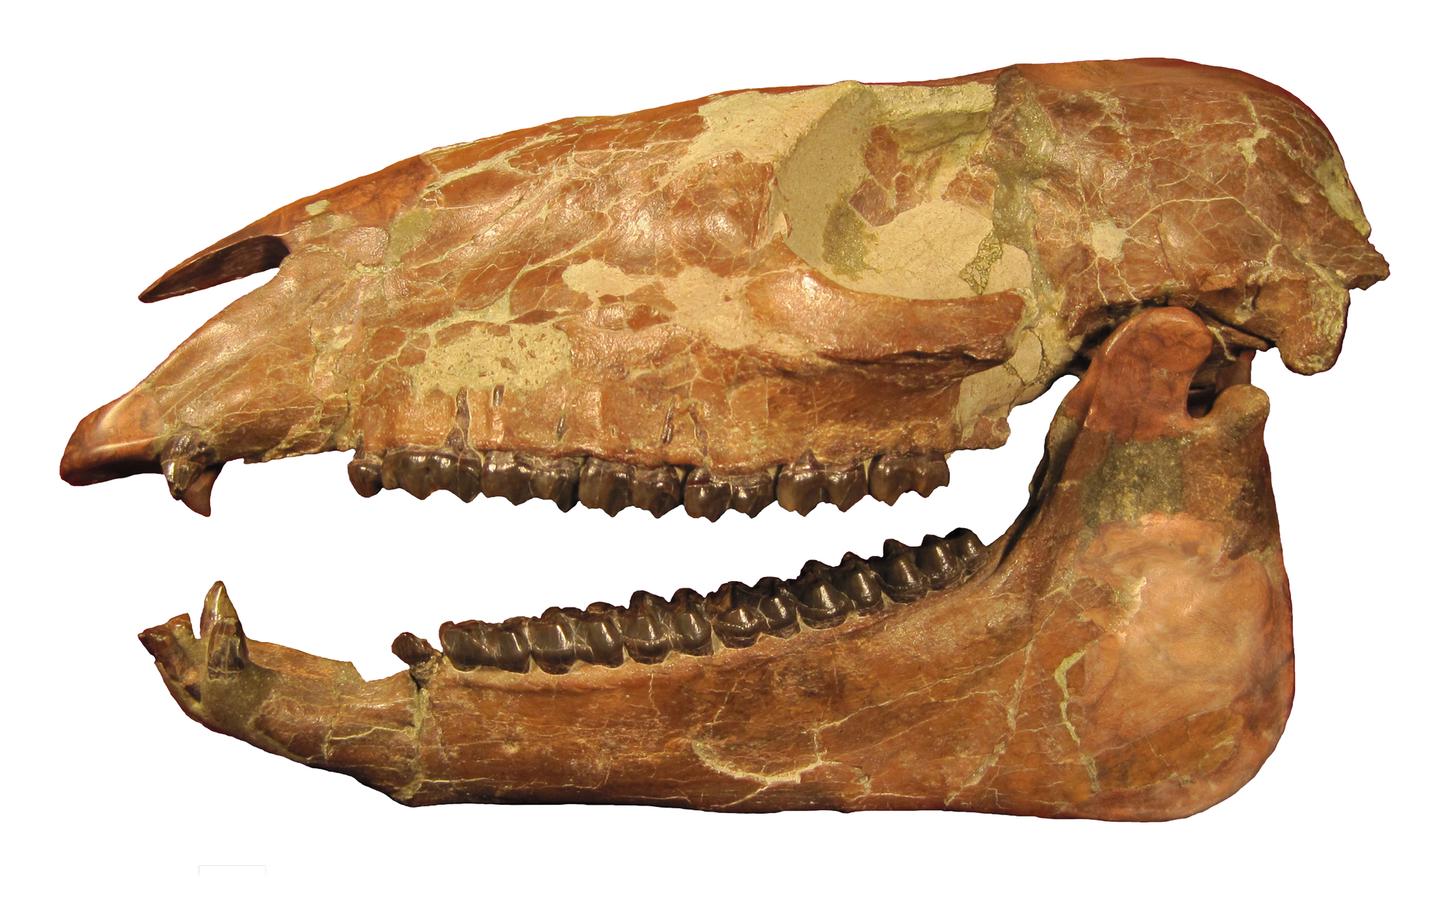 MiohippusMiohippus is just one of many amazing fossils found here.